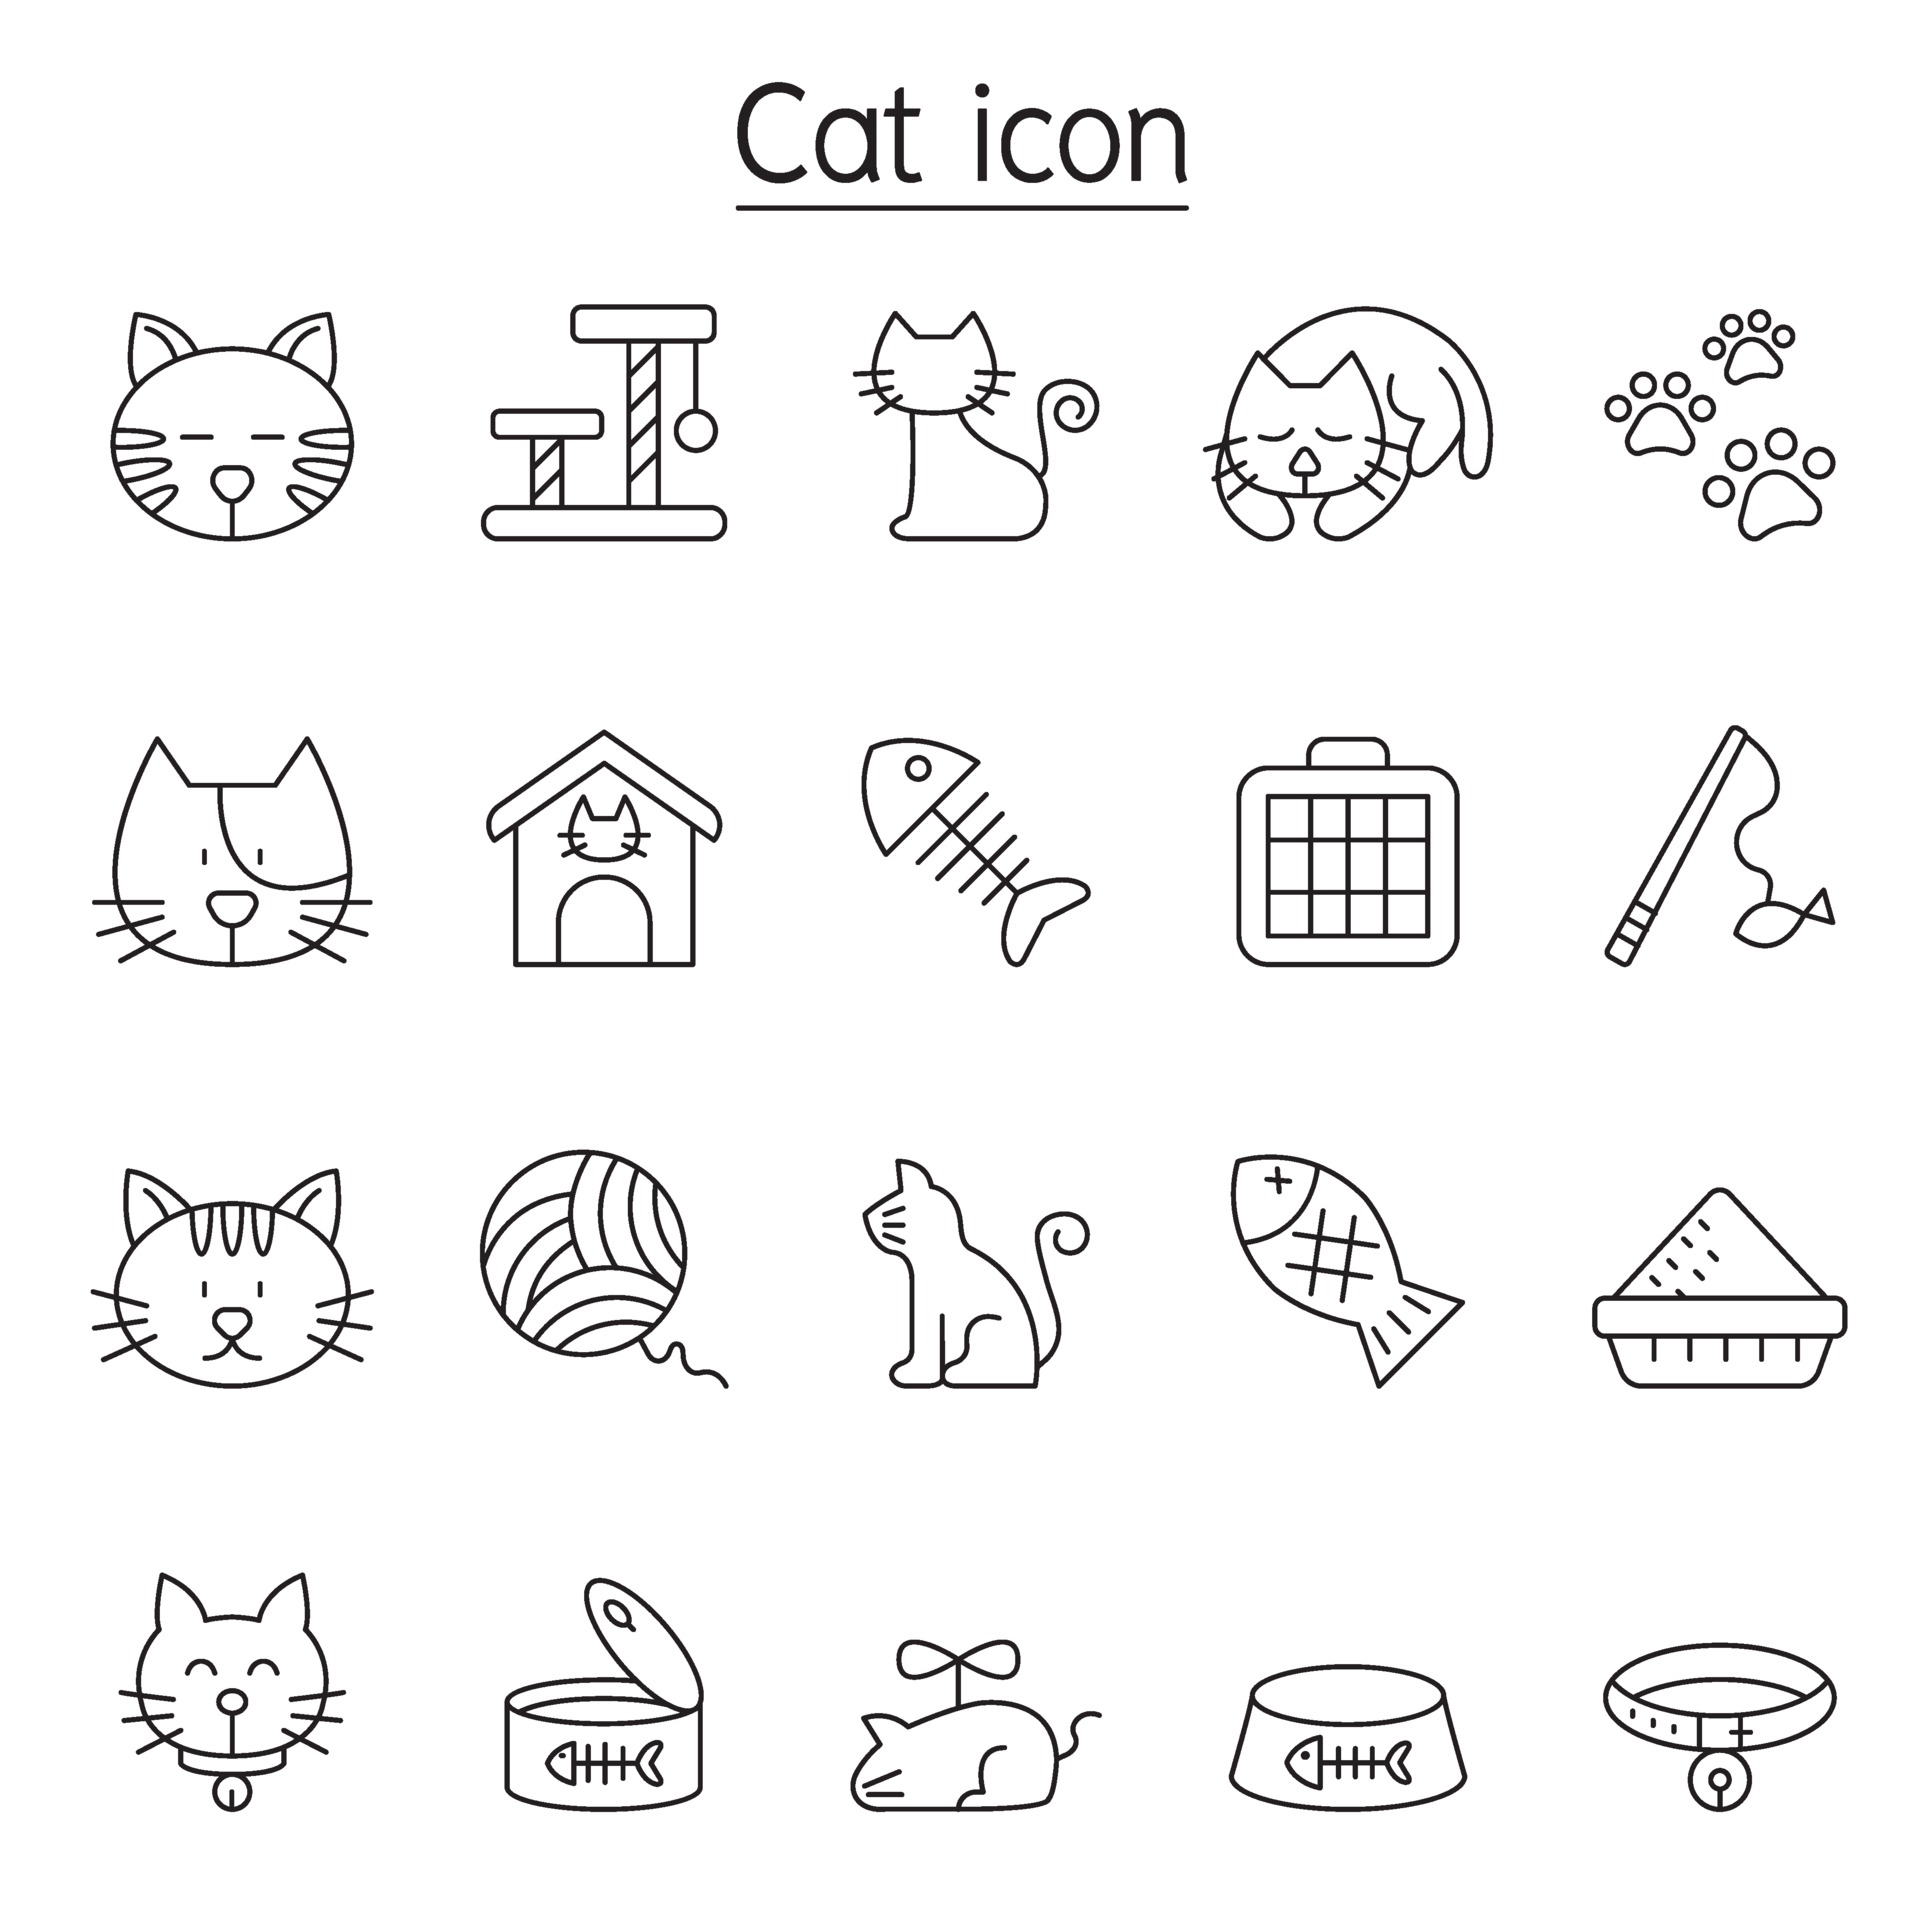 Cat 2 Icon, Keith's Cats Iconpack